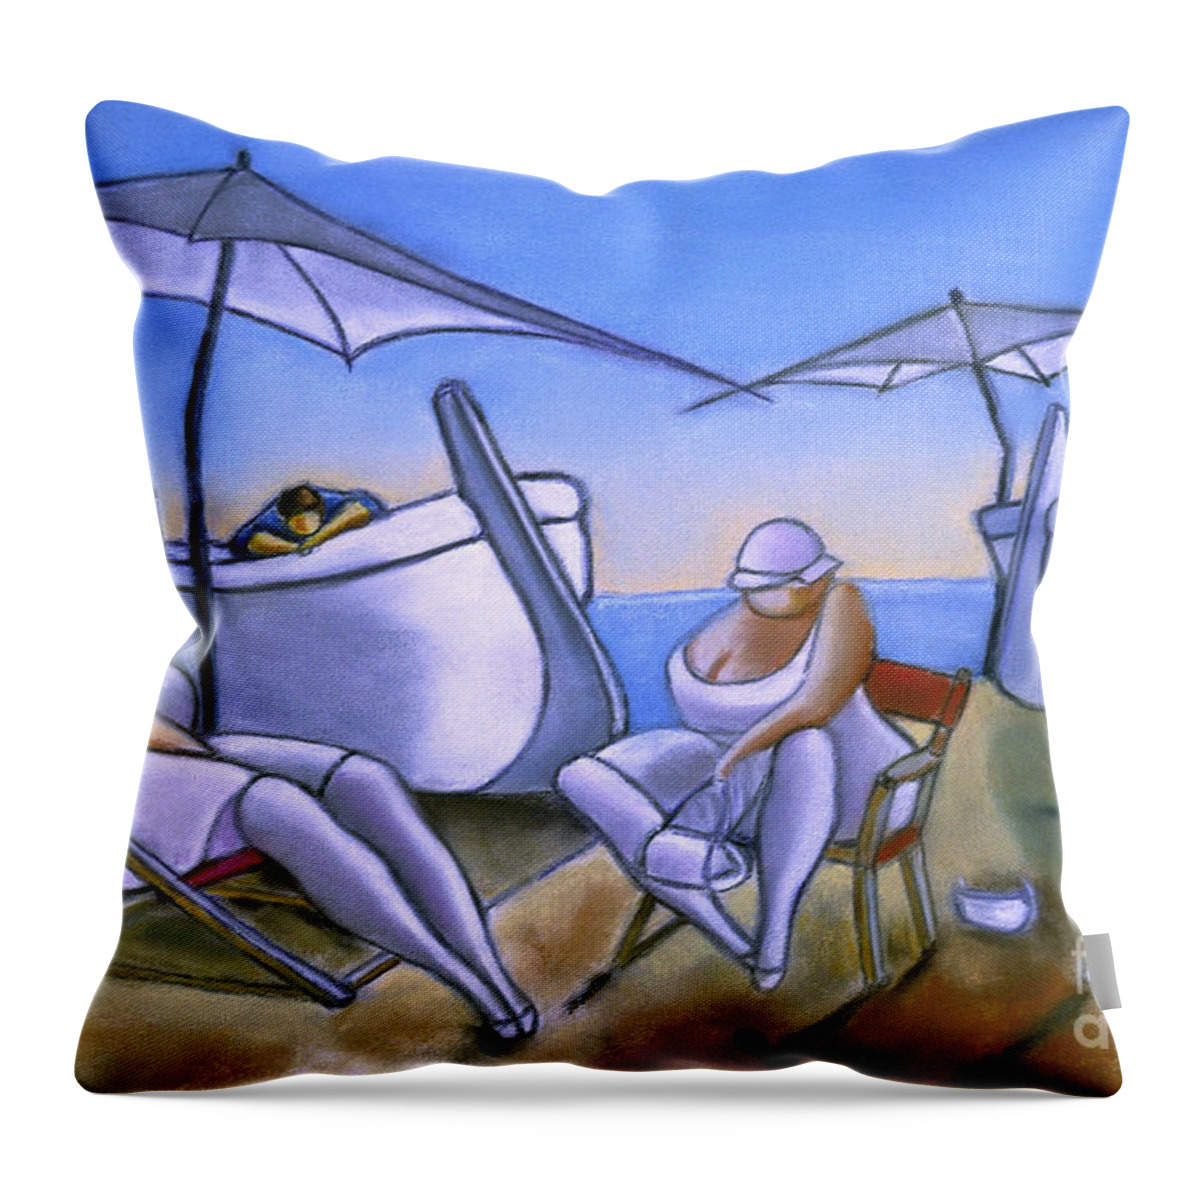 Mediterranean Beach Throw Pillow featuring the painting Day At The Beach #2 by William Cain